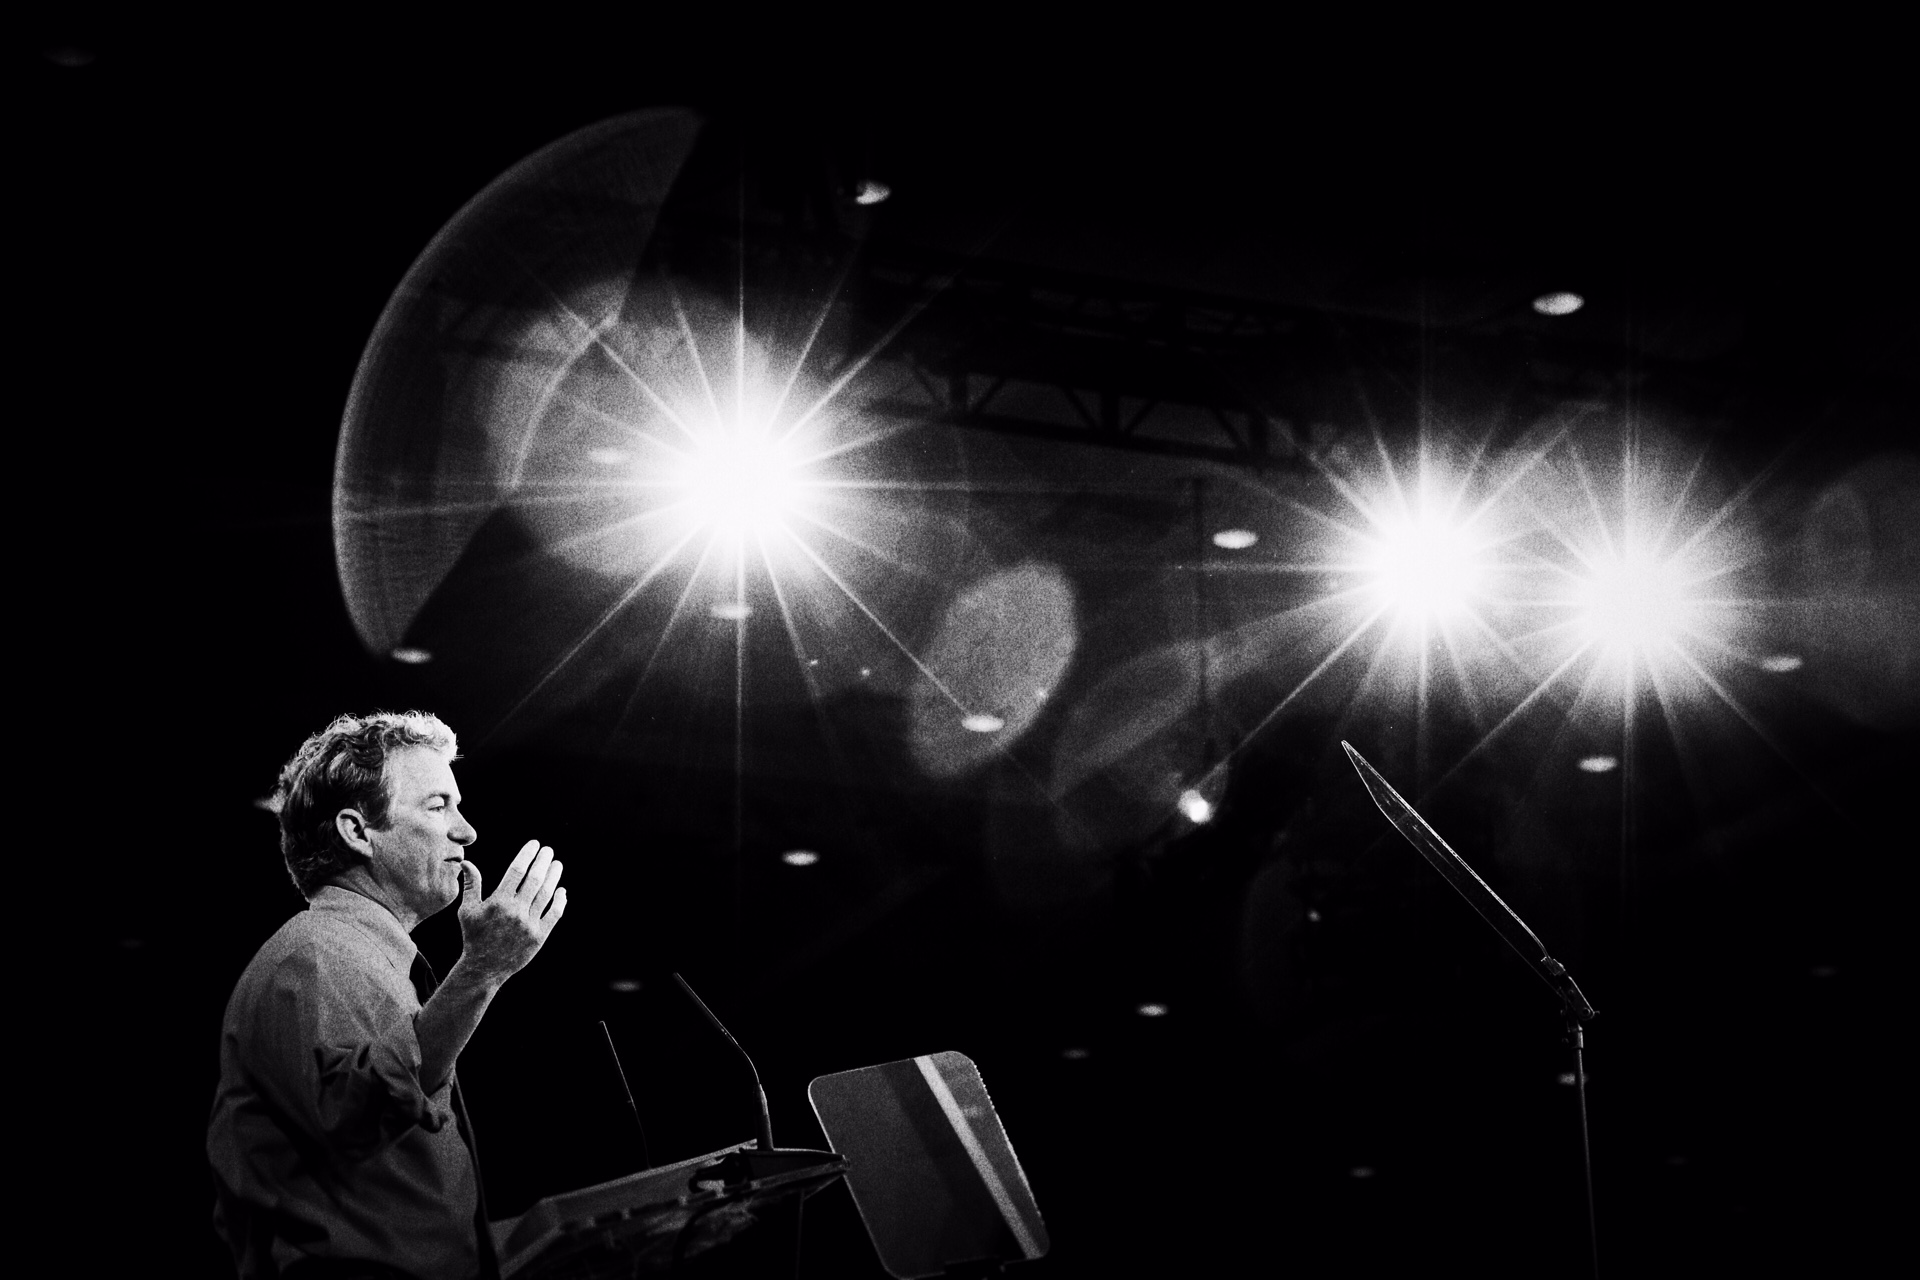 Rand Paul speaks at CPAC in National Harbor, Md. on Feb. 27, 2015.